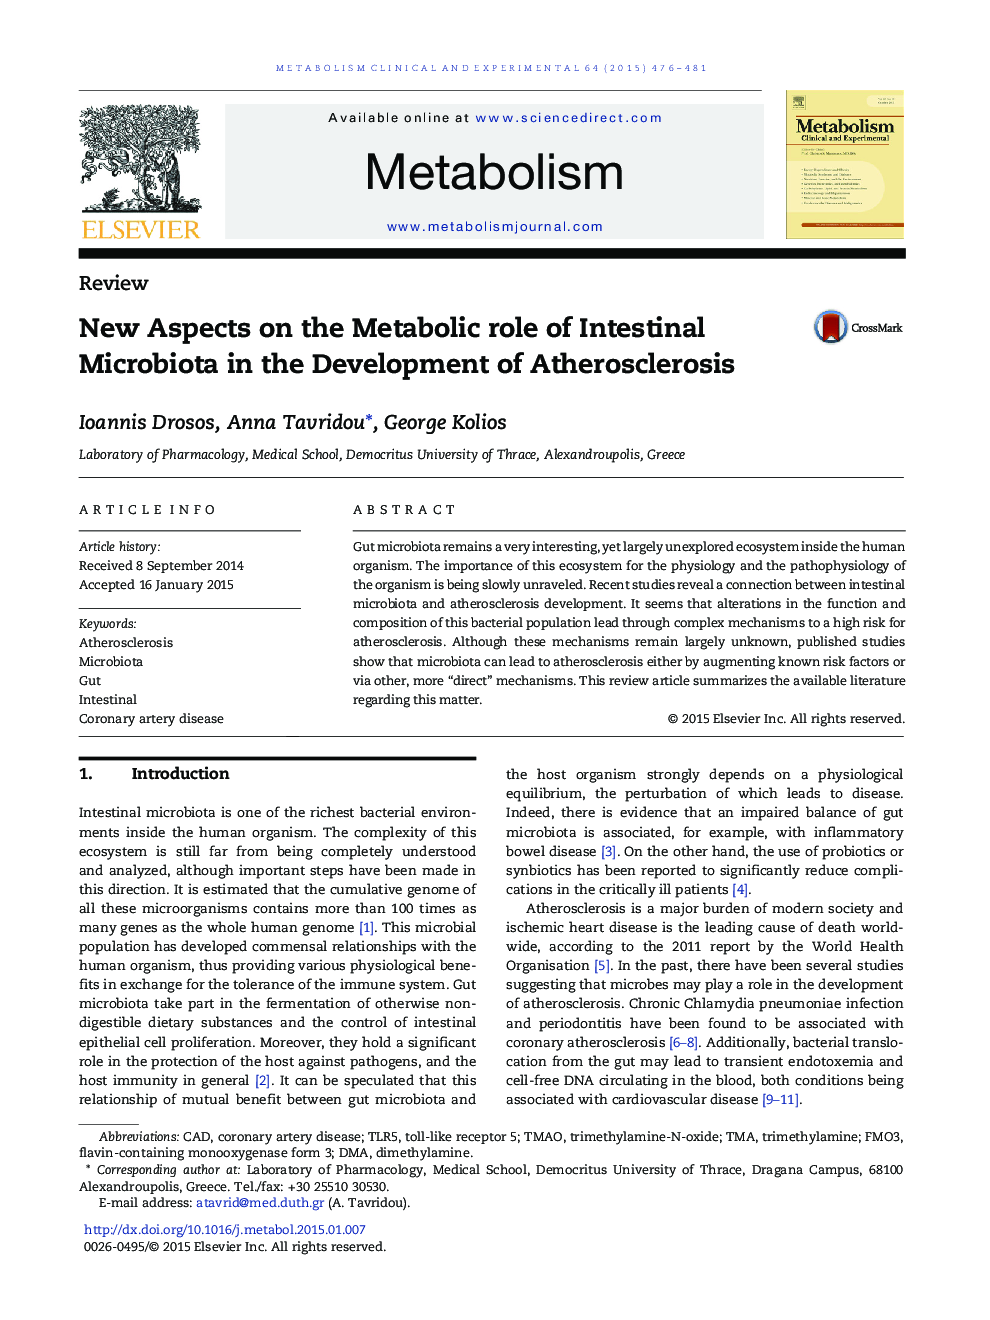 New Aspects on the Metabolic role of Intestinal Microbiota in the Development of Atherosclerosis